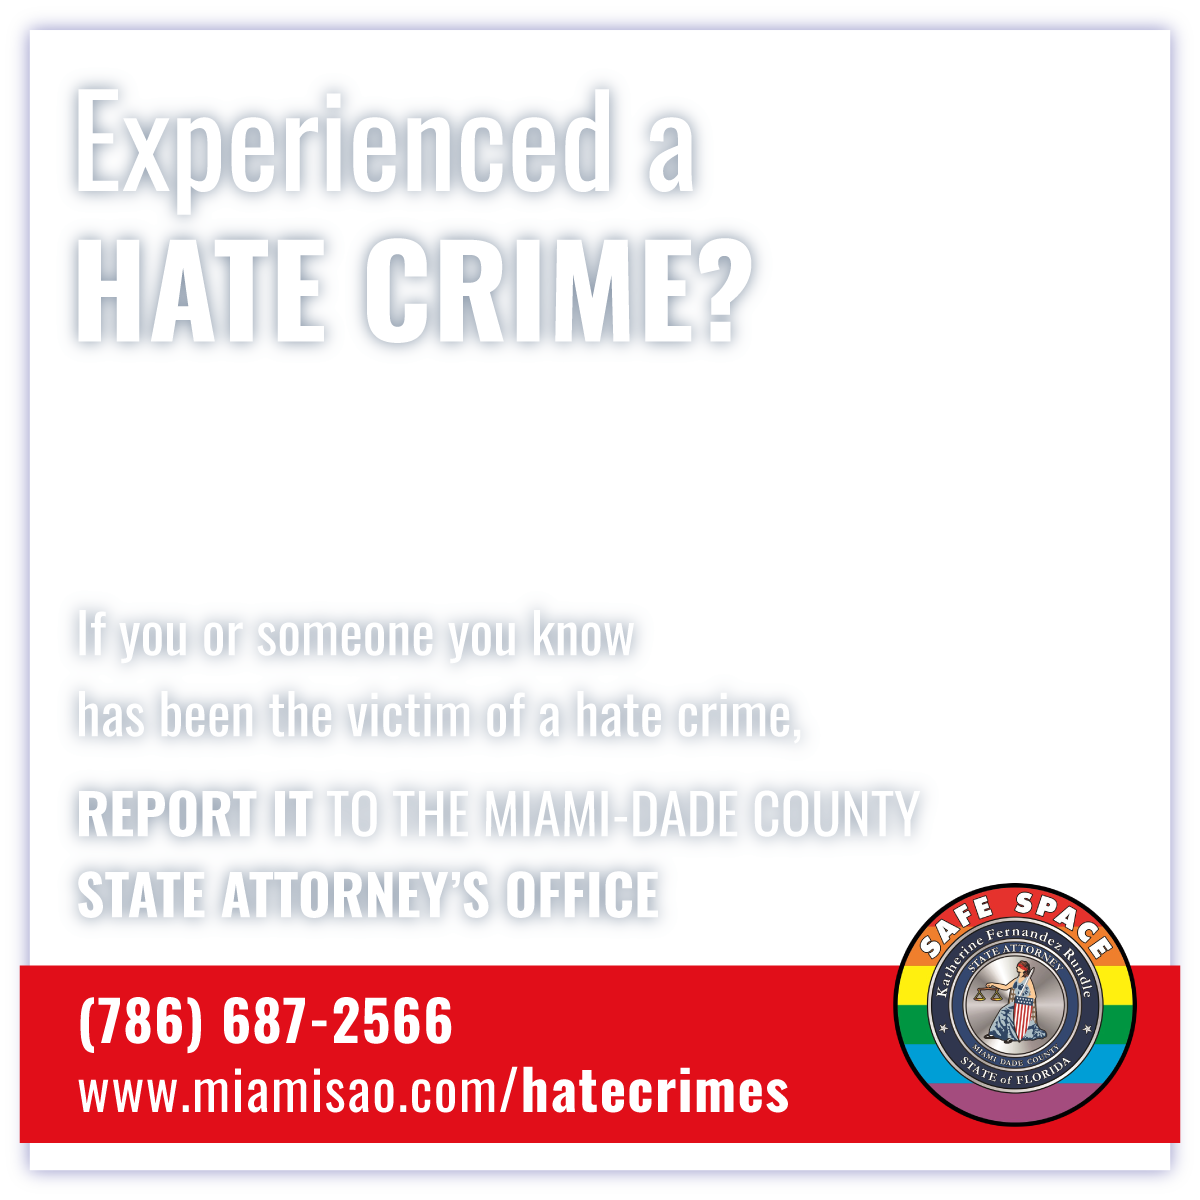 Report Hate Crime to the State Attorney Office